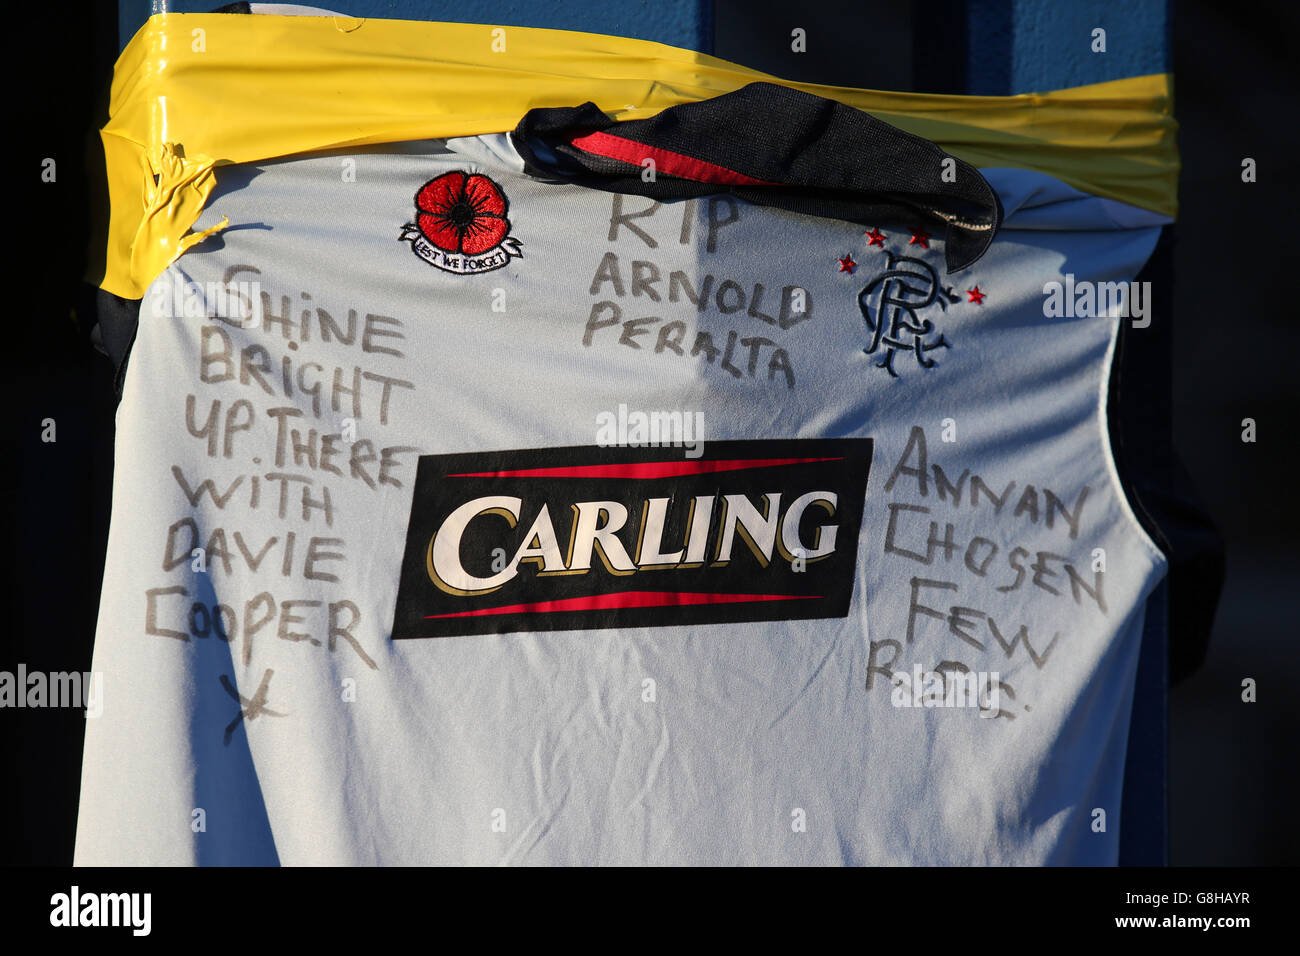 Fans leave messages in memory of former player Arnold Peralta before the Ladbrokes Scottish Championship match between Rangers and Greenock Morton. Stock Photo